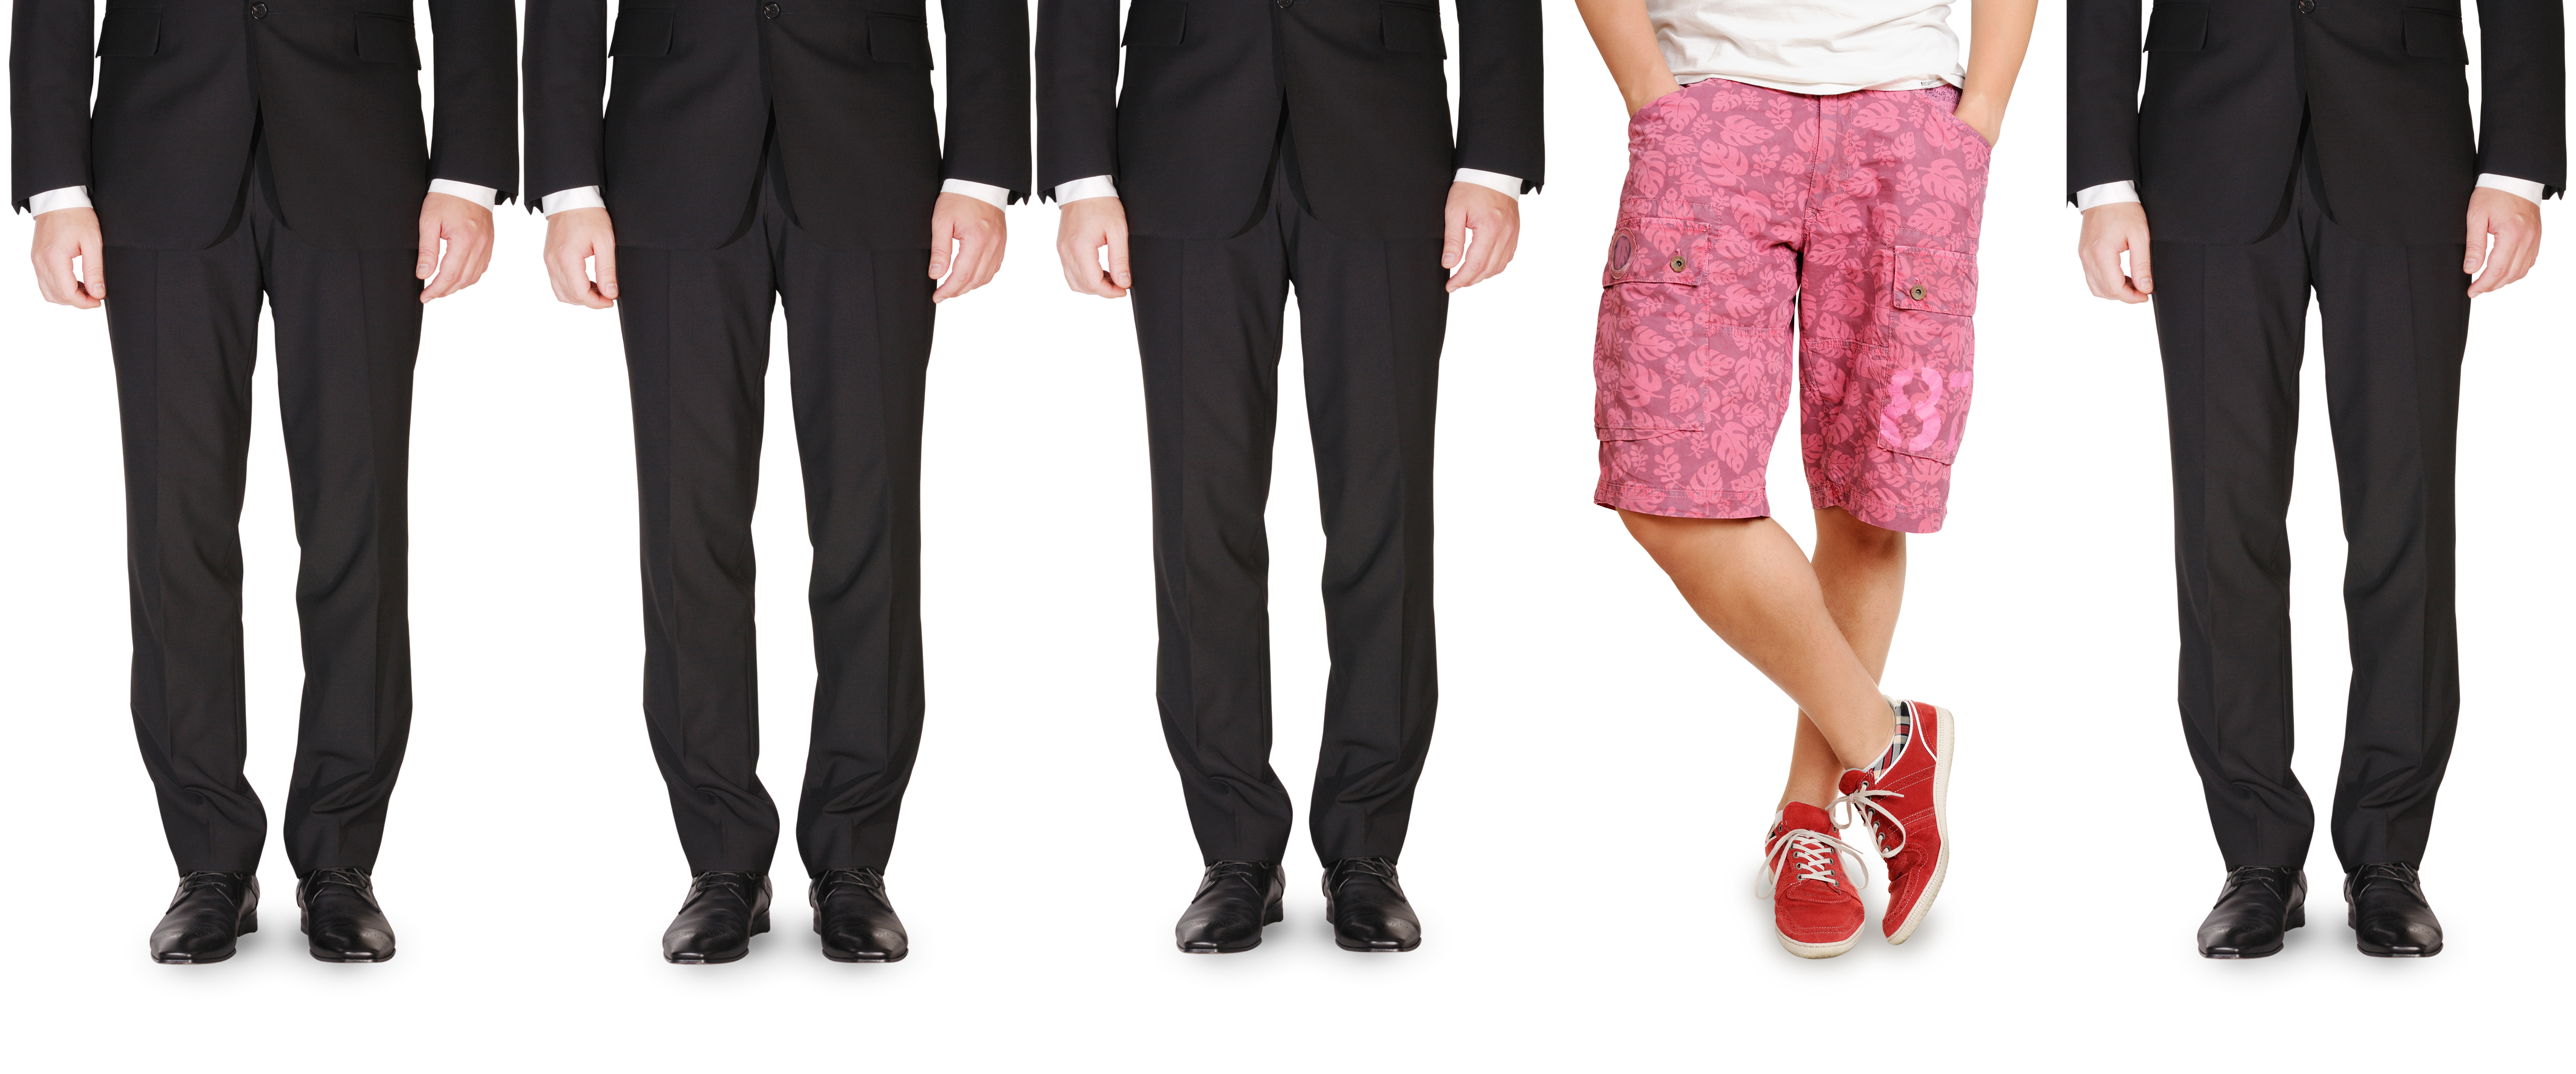 Can men wear shorts to work during the heatwave? Office etiquette